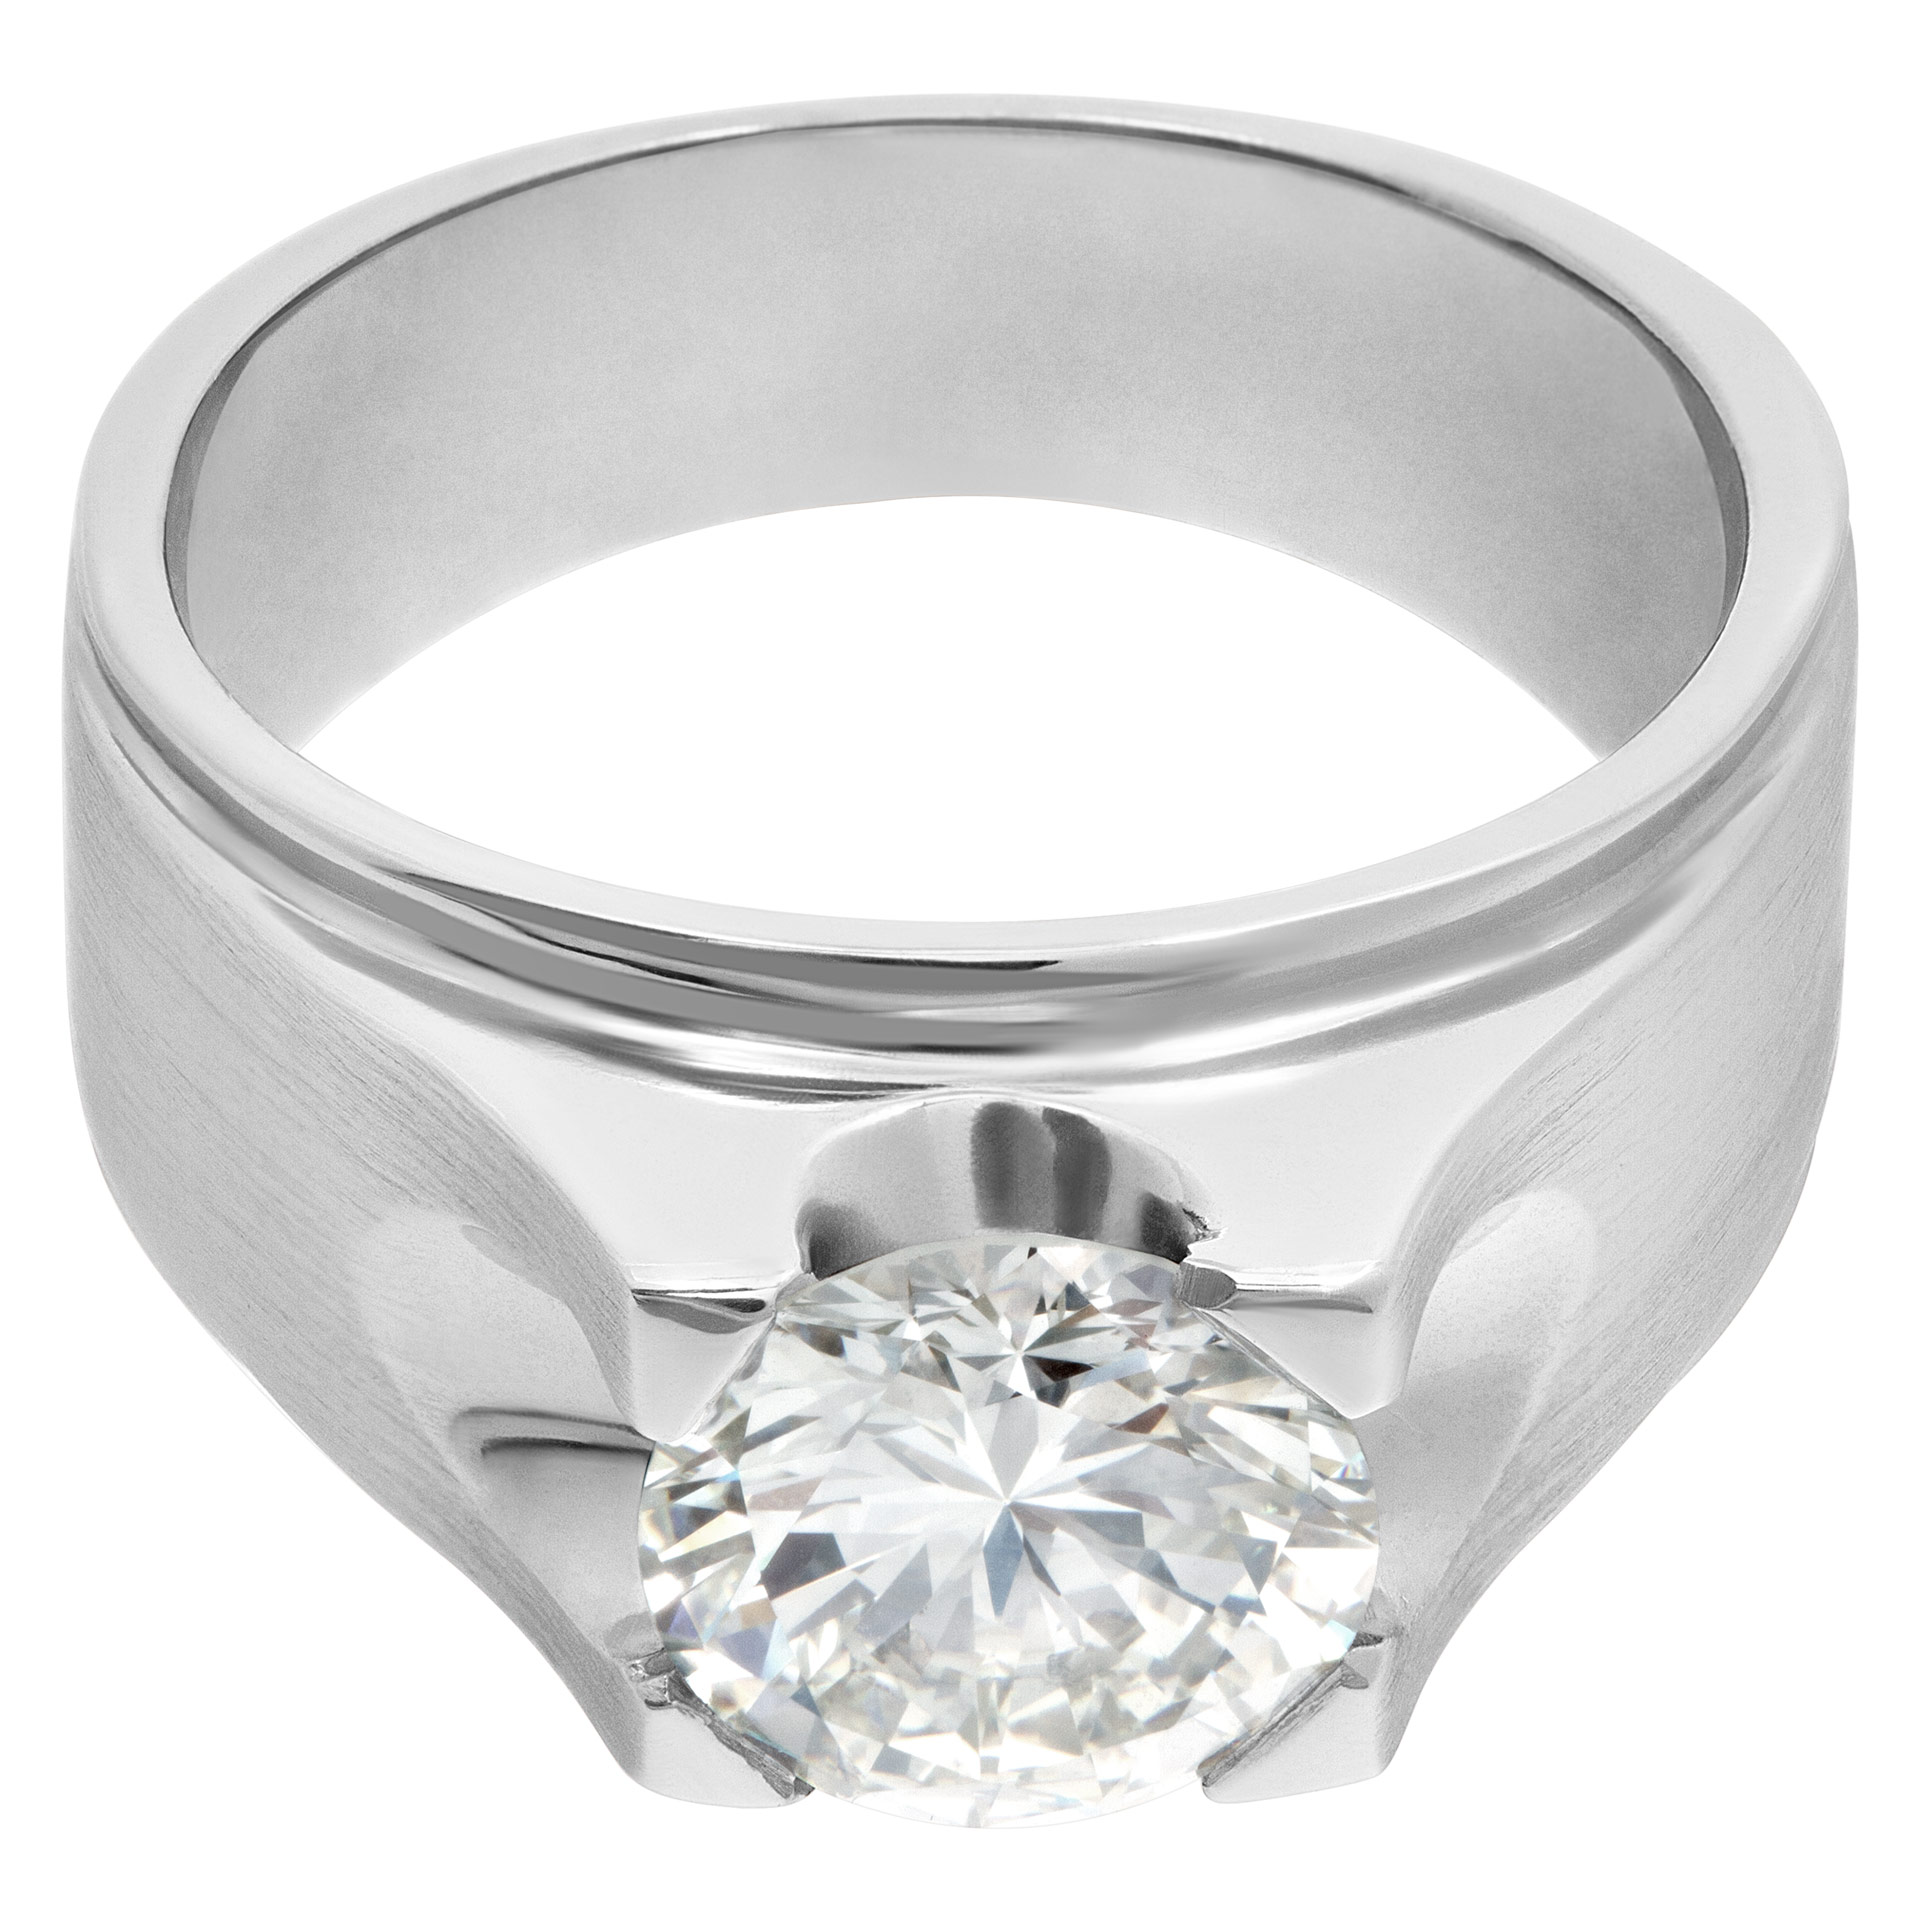 GIA certified 2.01 carat (K color, VVS2 clarity) round brilliant cut diamond in an 18k white gold Gypsy setting. image 3